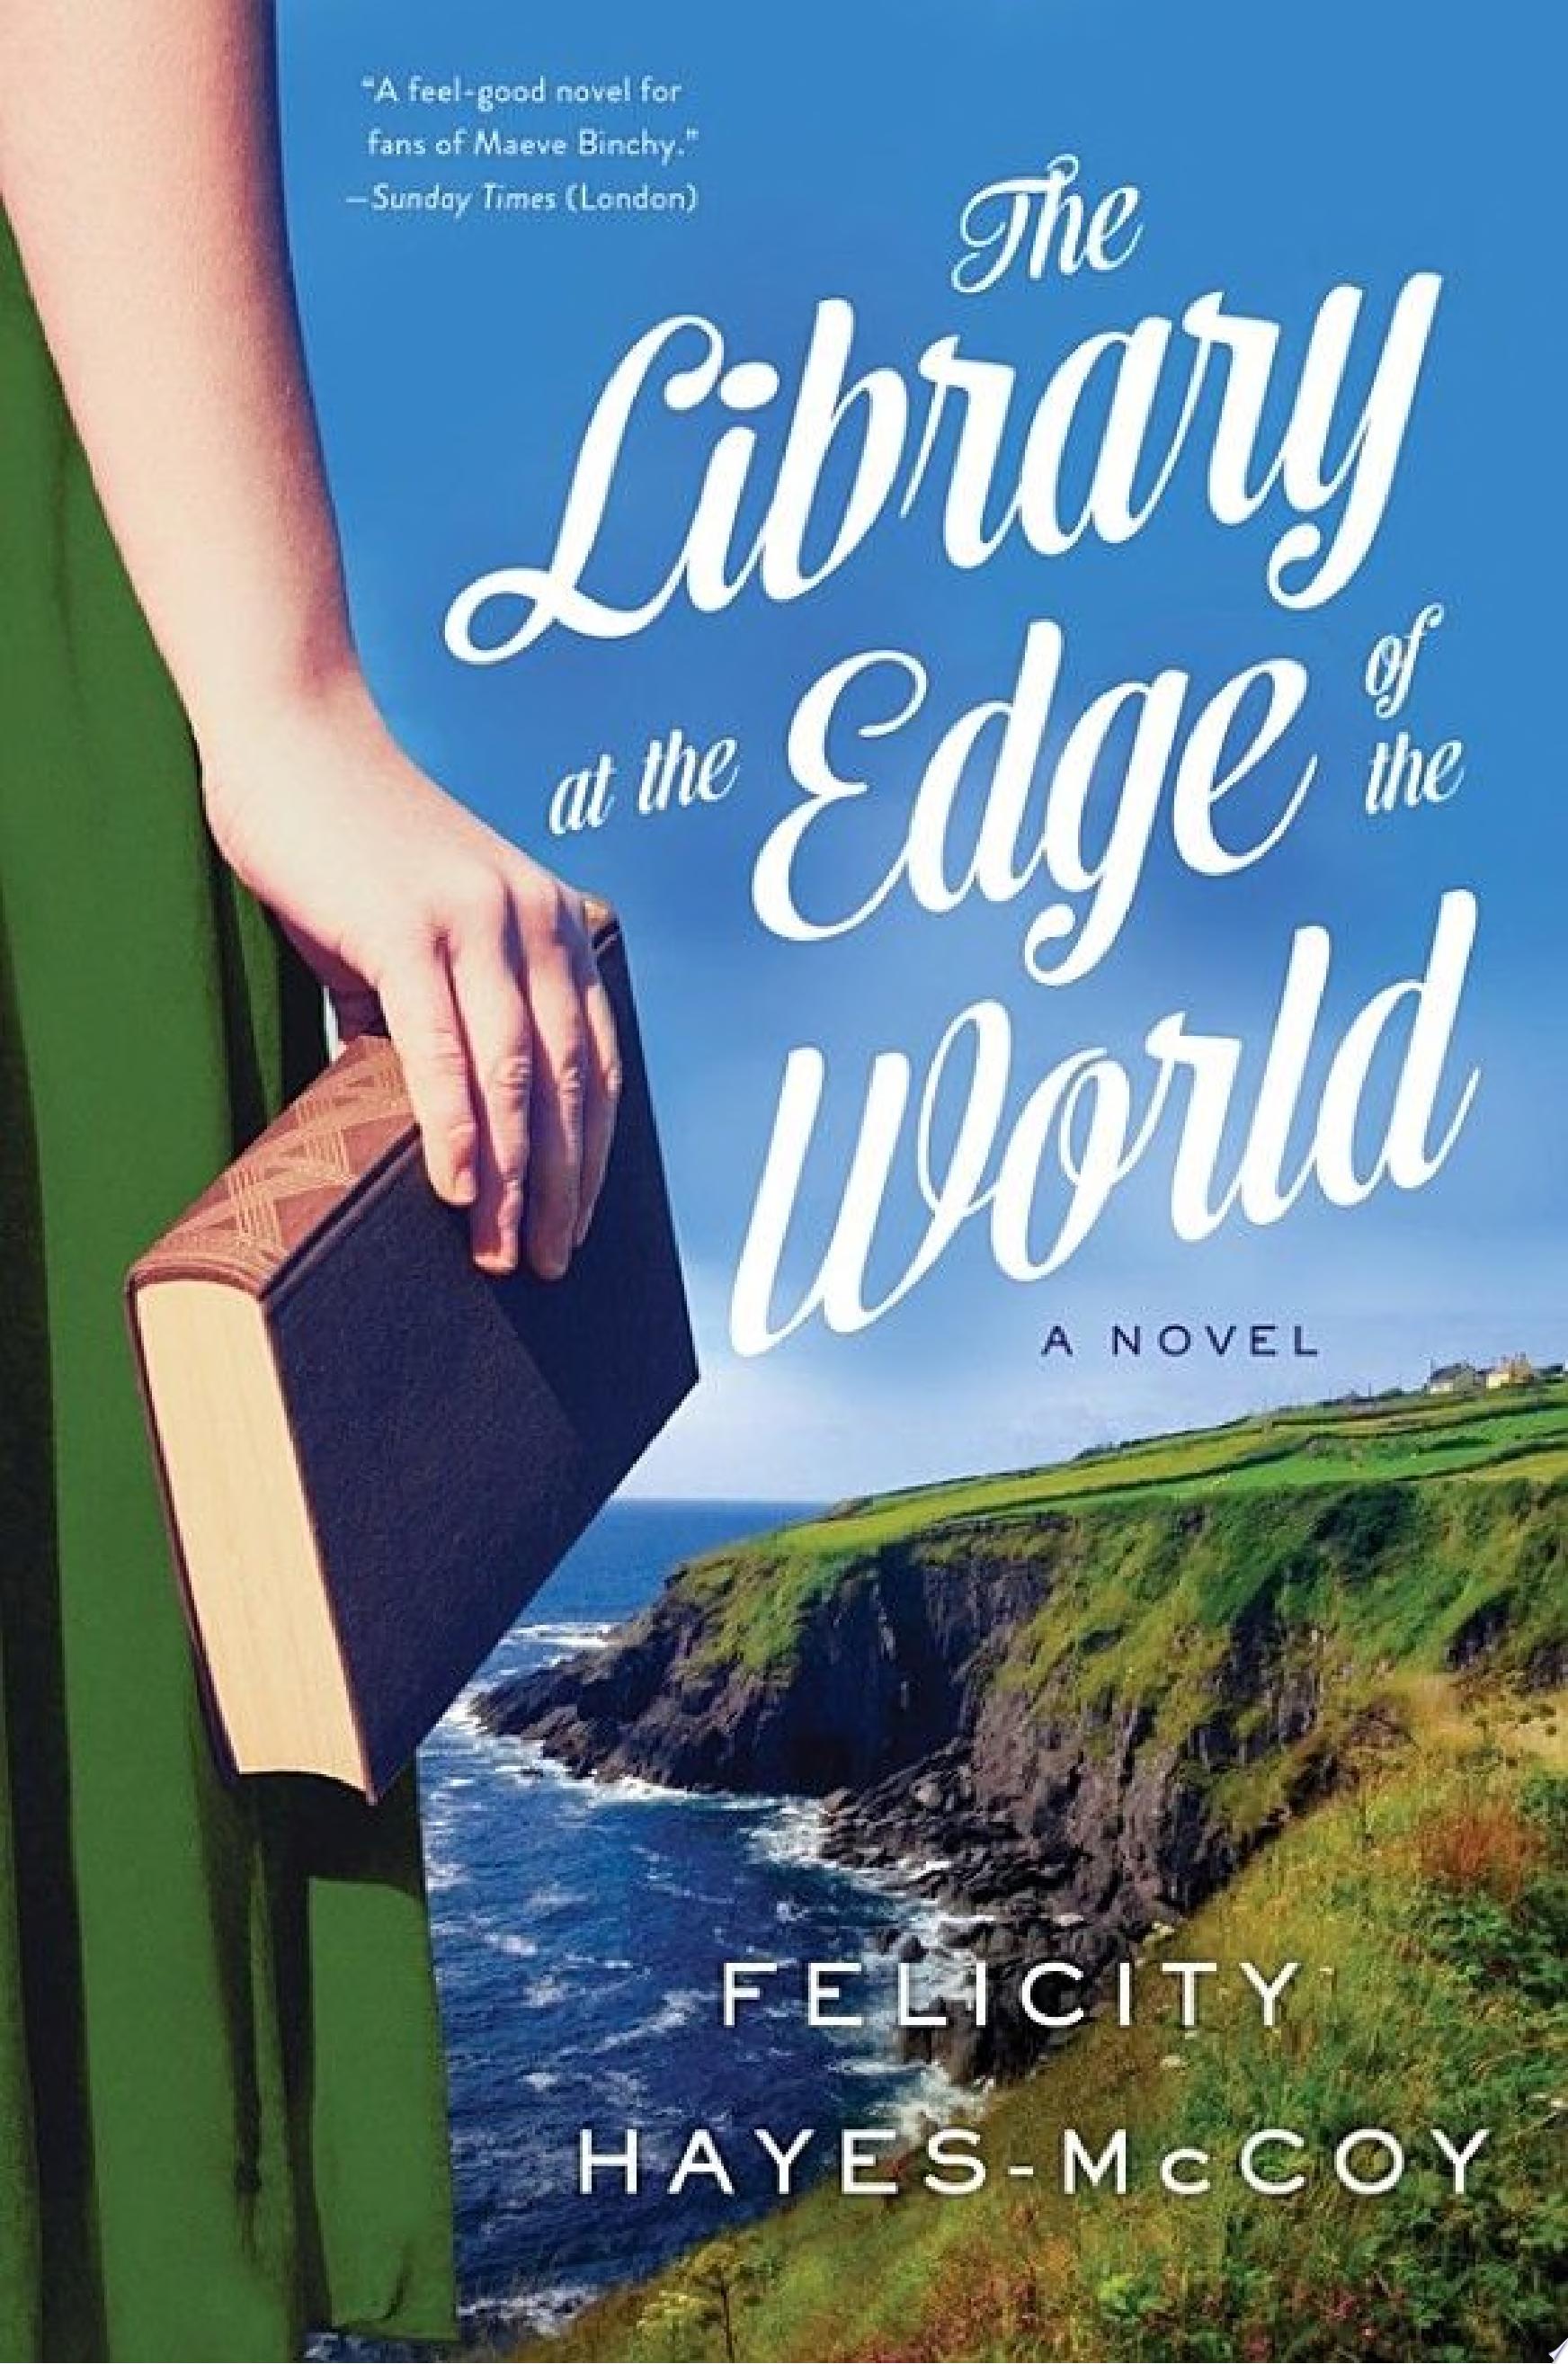 Image for "The Library at the Edge of the World"